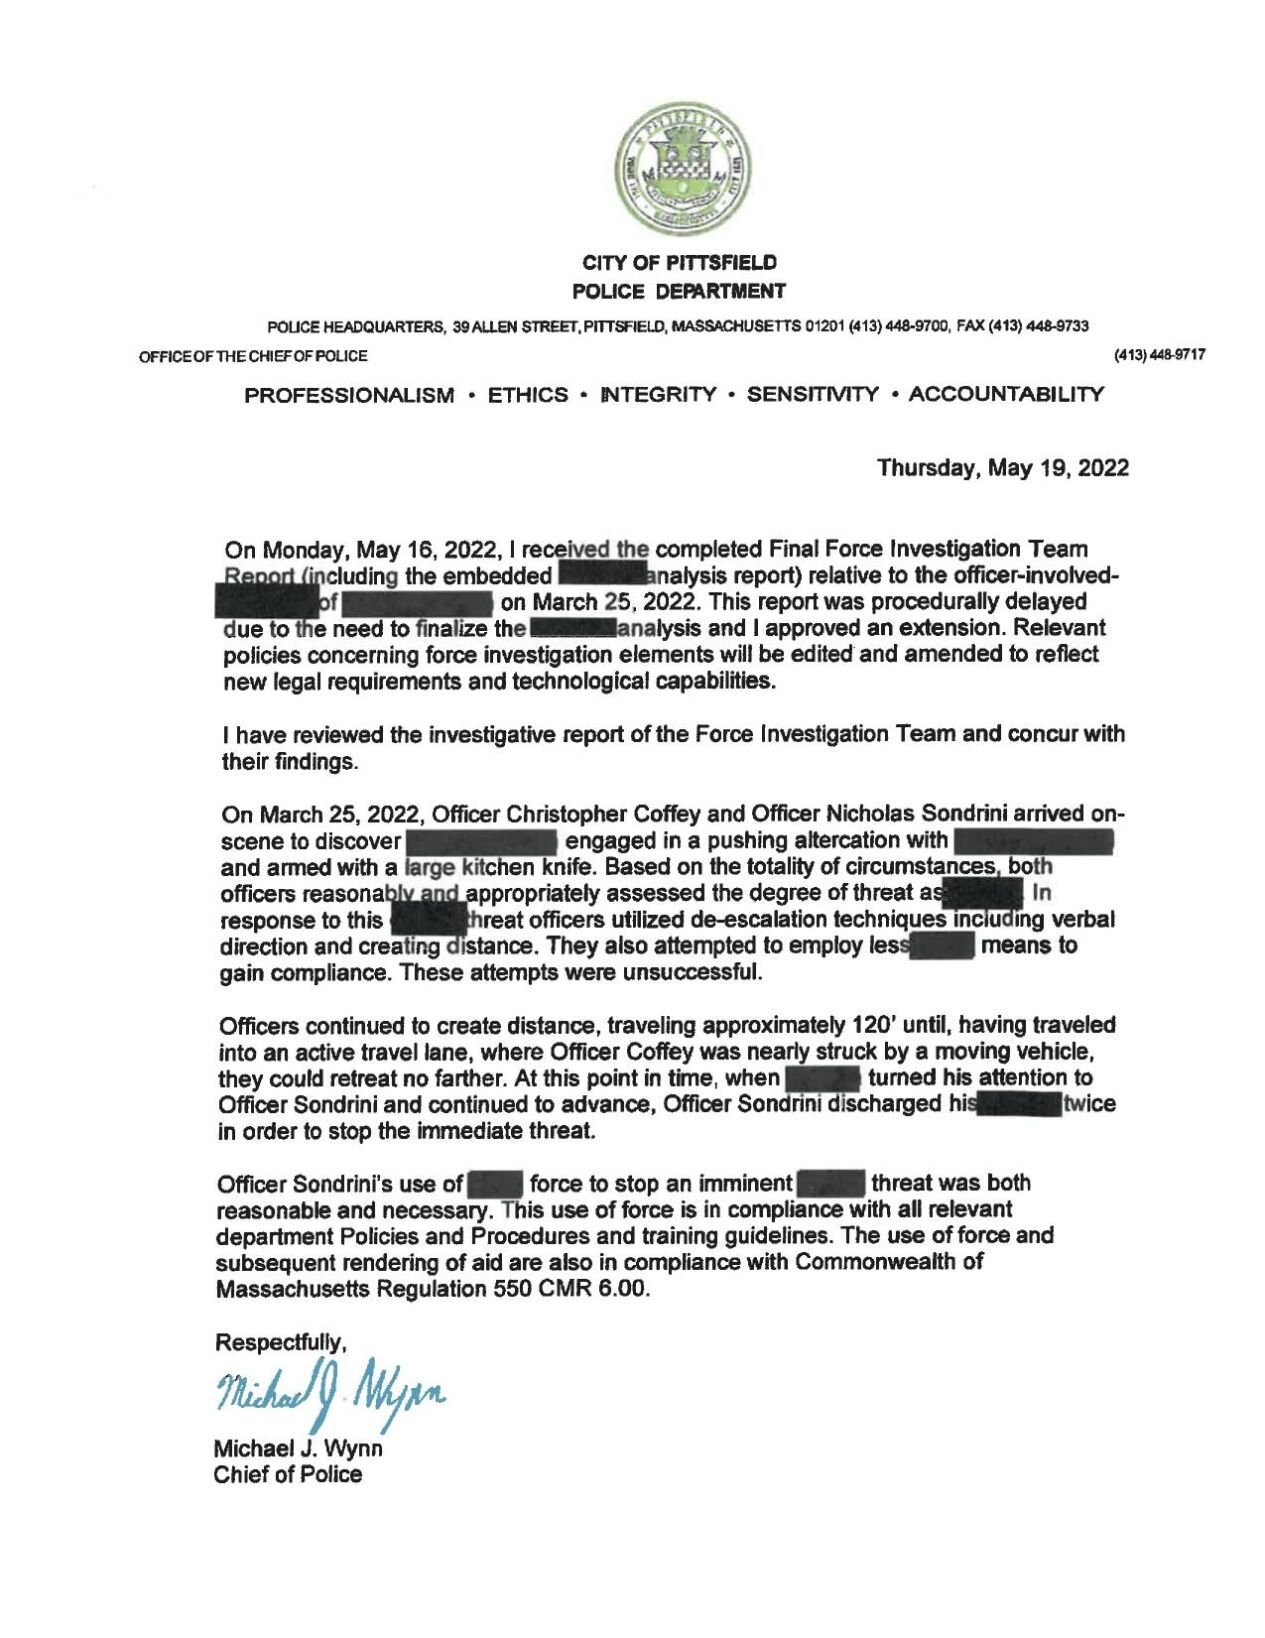 A May 19 letter from Chief Michael Wynn accepting the final FIT report on the Estrella shooting